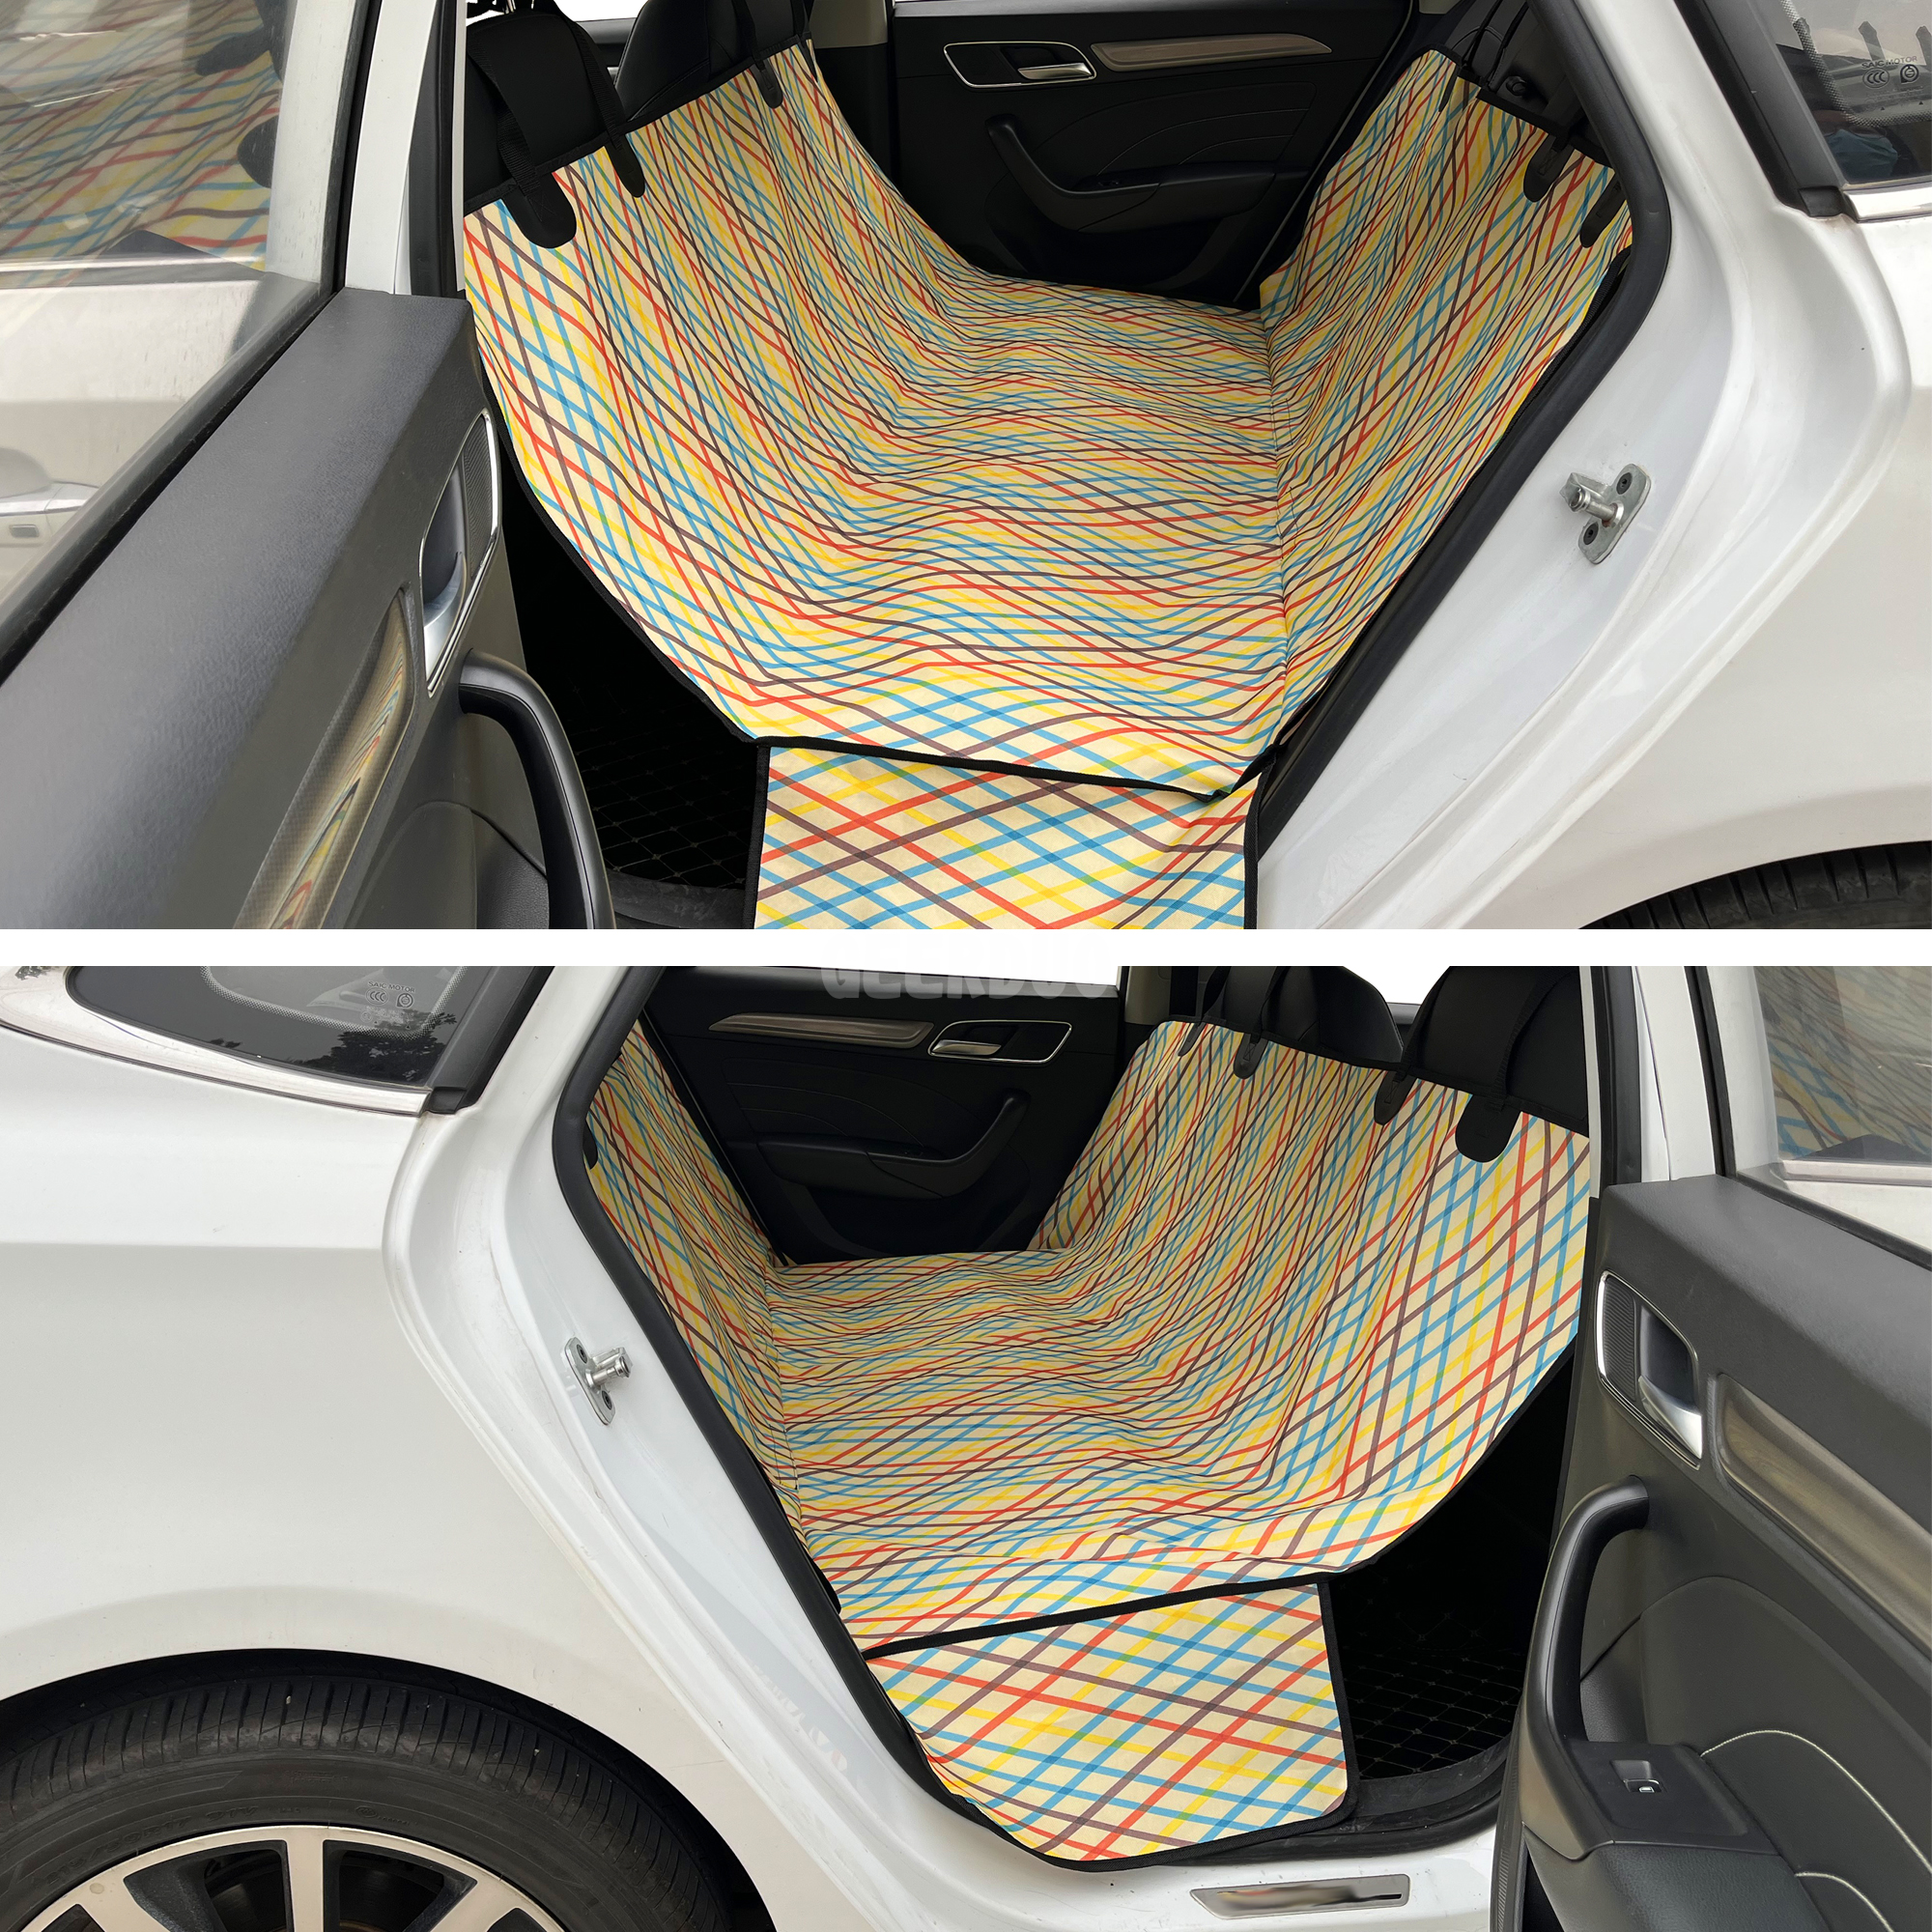 Custom Printing Pattern Dog Car Back Seat Trunk Cover Bench Protector GRDSB-16